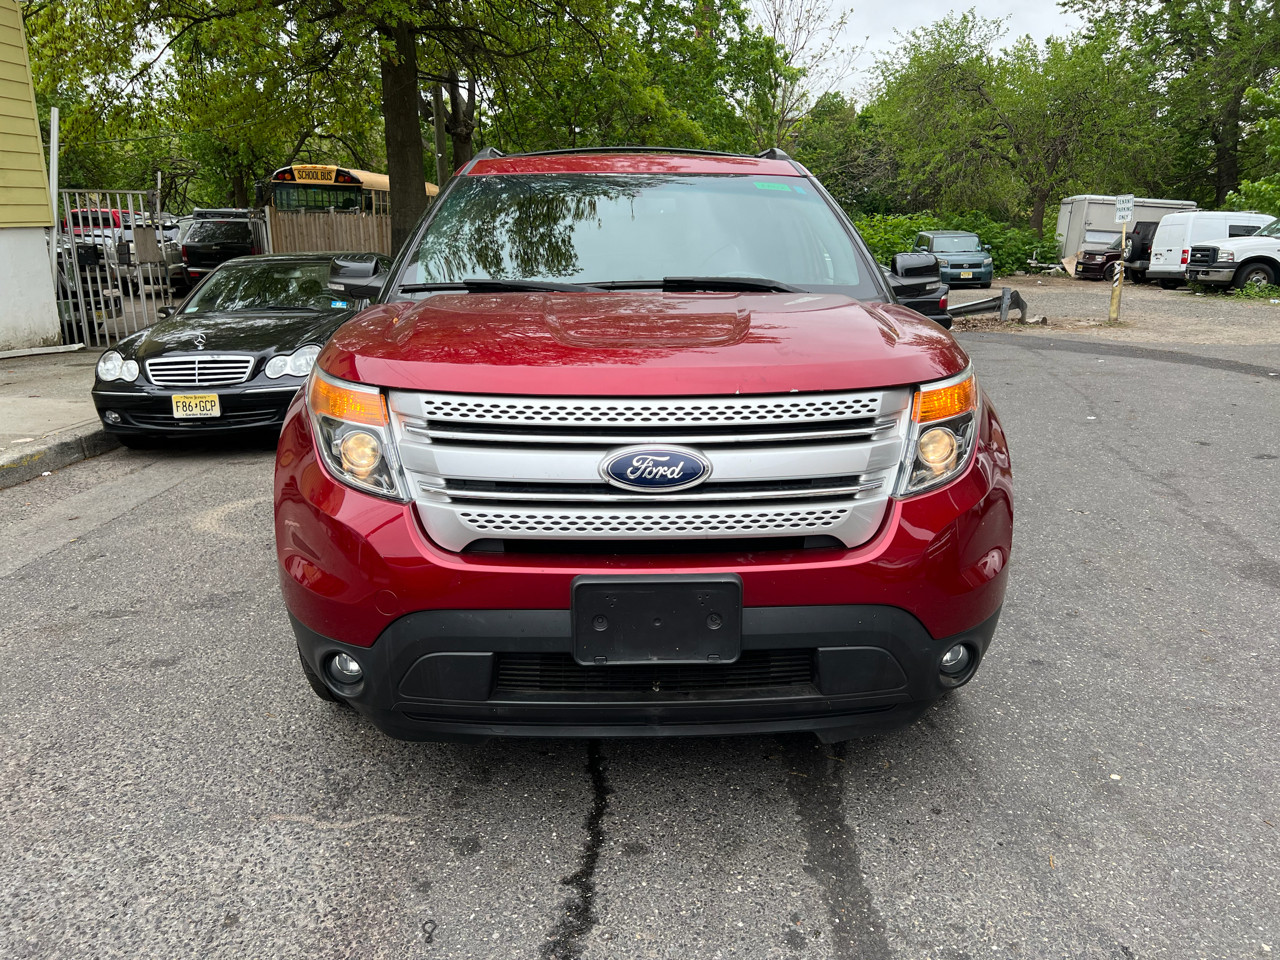 Preowned 2015 FORD Explorer XLT 4WD for sale by Mike's Auto Sales in Garfield, NJ